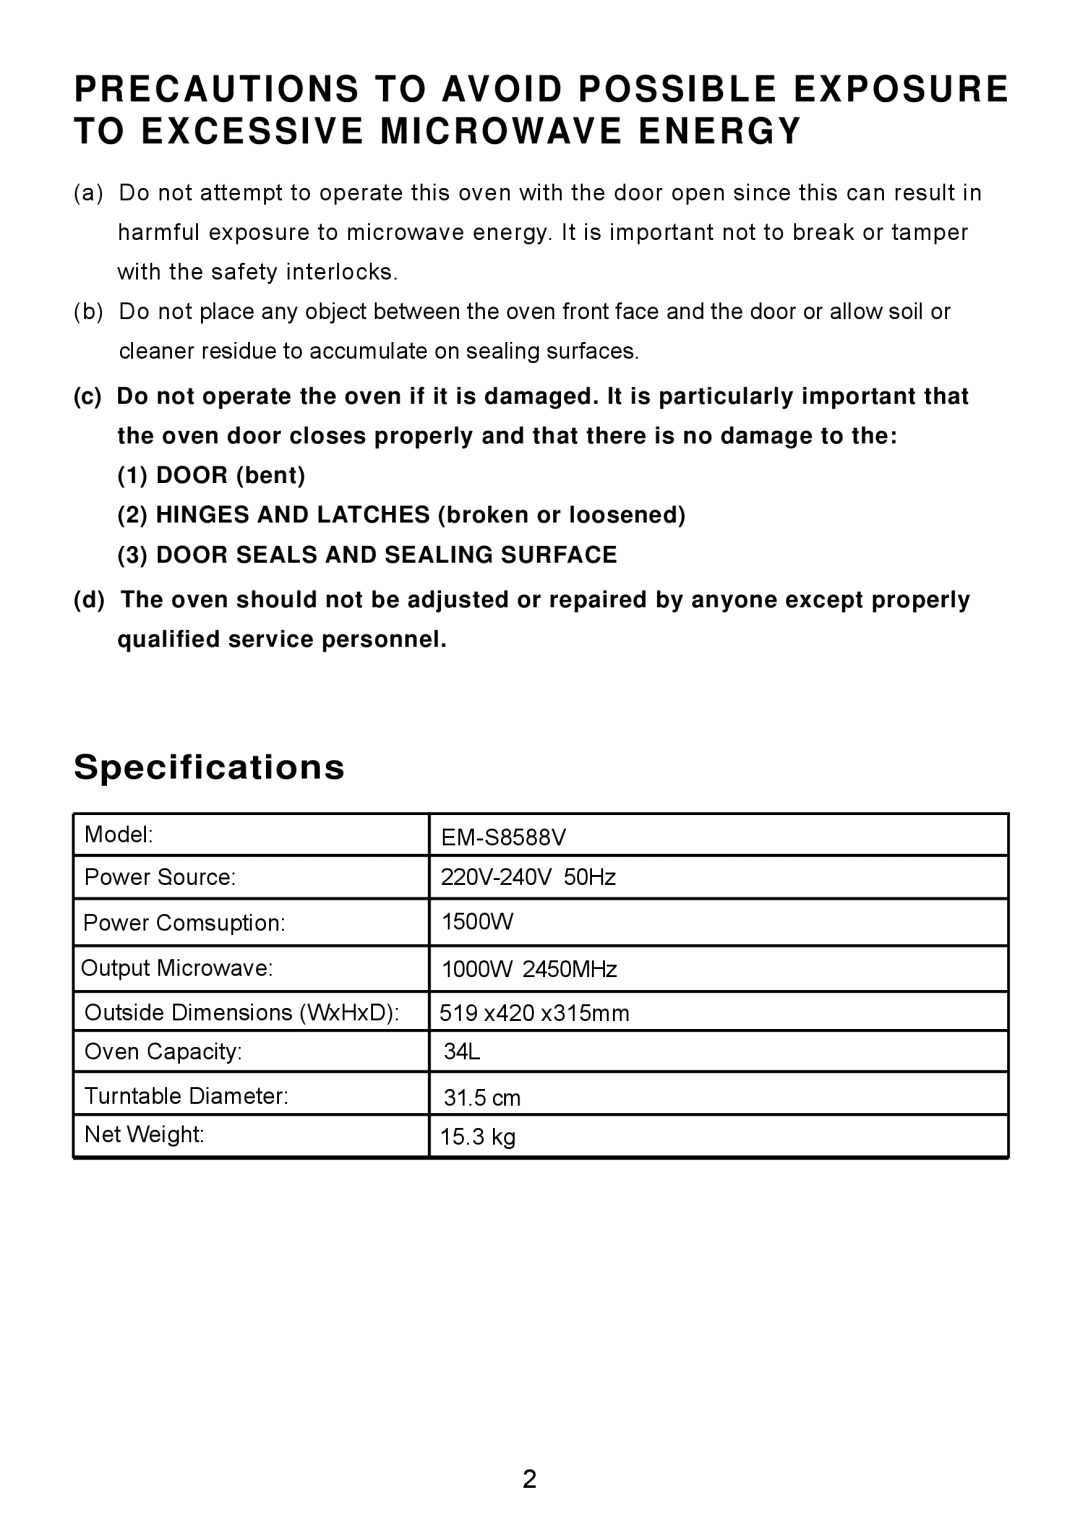 Sanyo EM-S8588V instruction manual Precautions To Avoid Possible Exposure To Excessive Microwave Energy, Specifications 